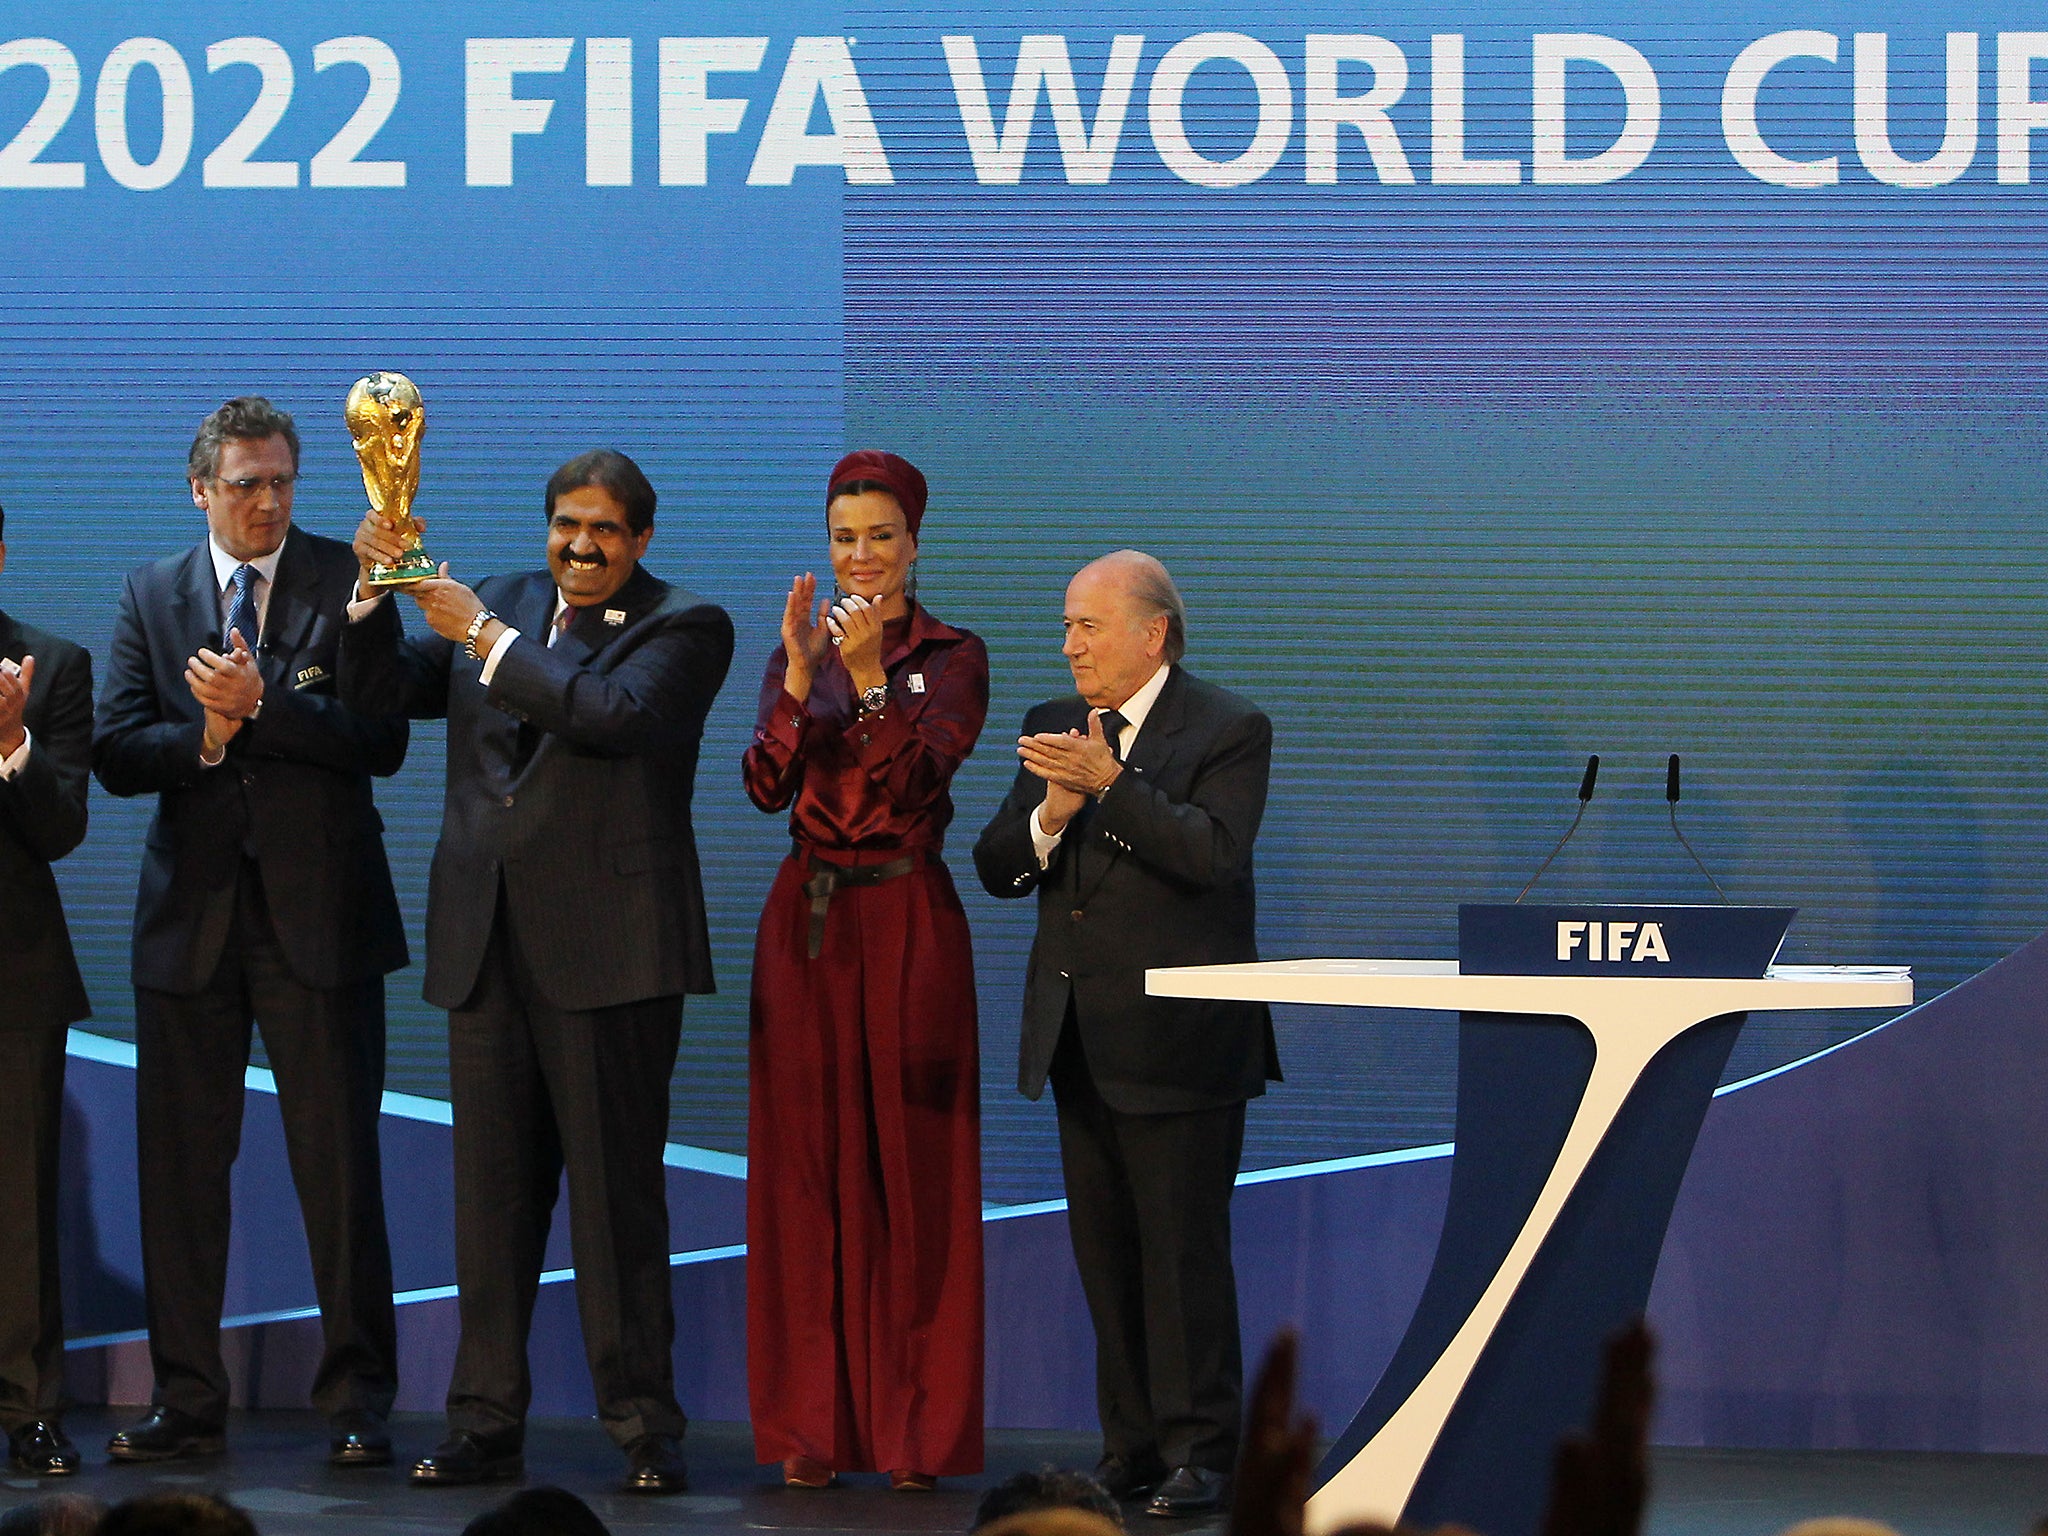 Qatar won the right to host the 2022 World Cup in 2010